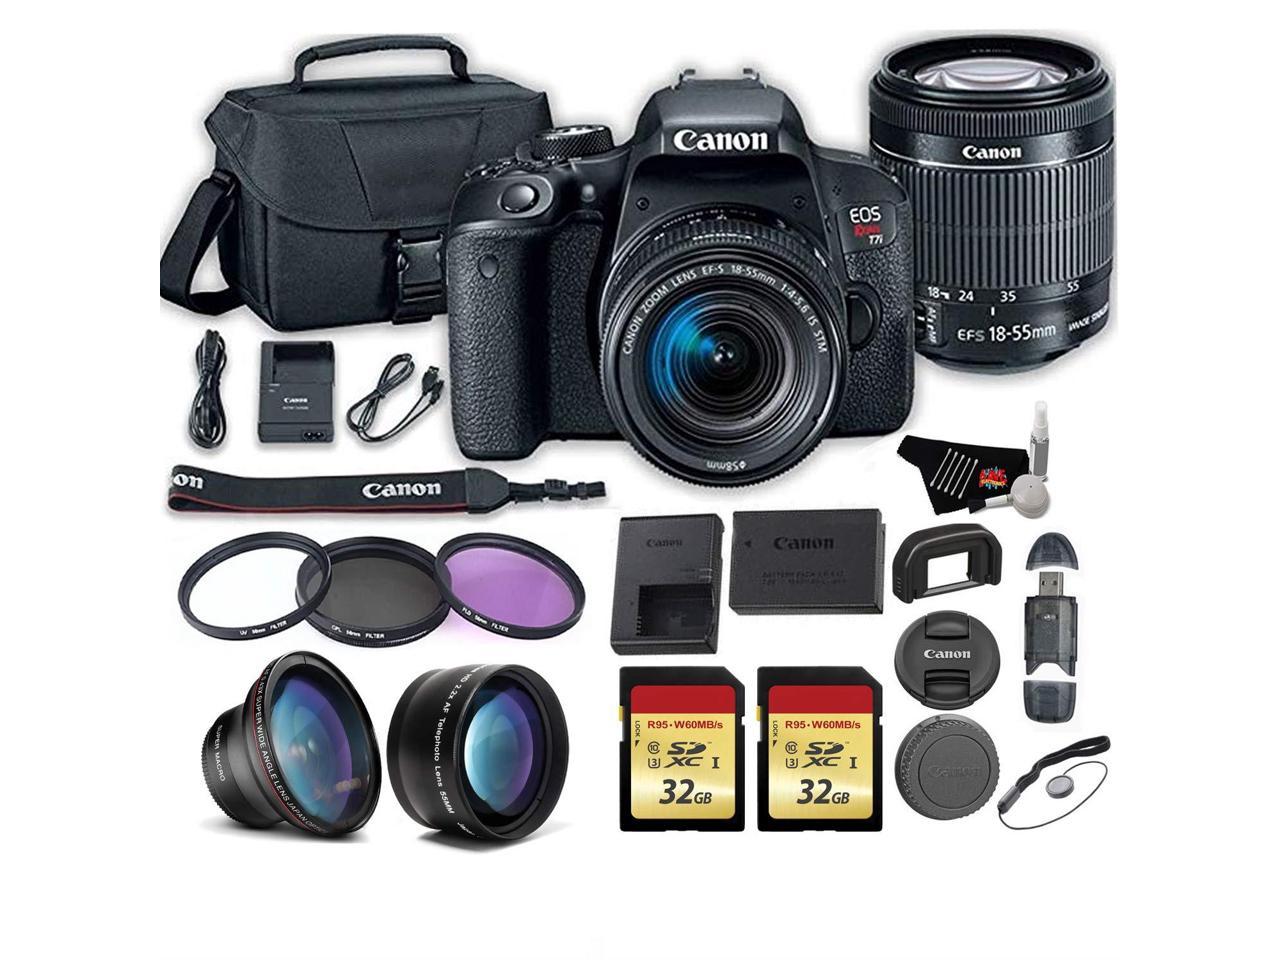 Canon EOS Rebel T7i DSLR Camera with 18-55mm IS STM Lens + Wideangle and Telephoto Lens + 2x 32GB Memory Cards + More